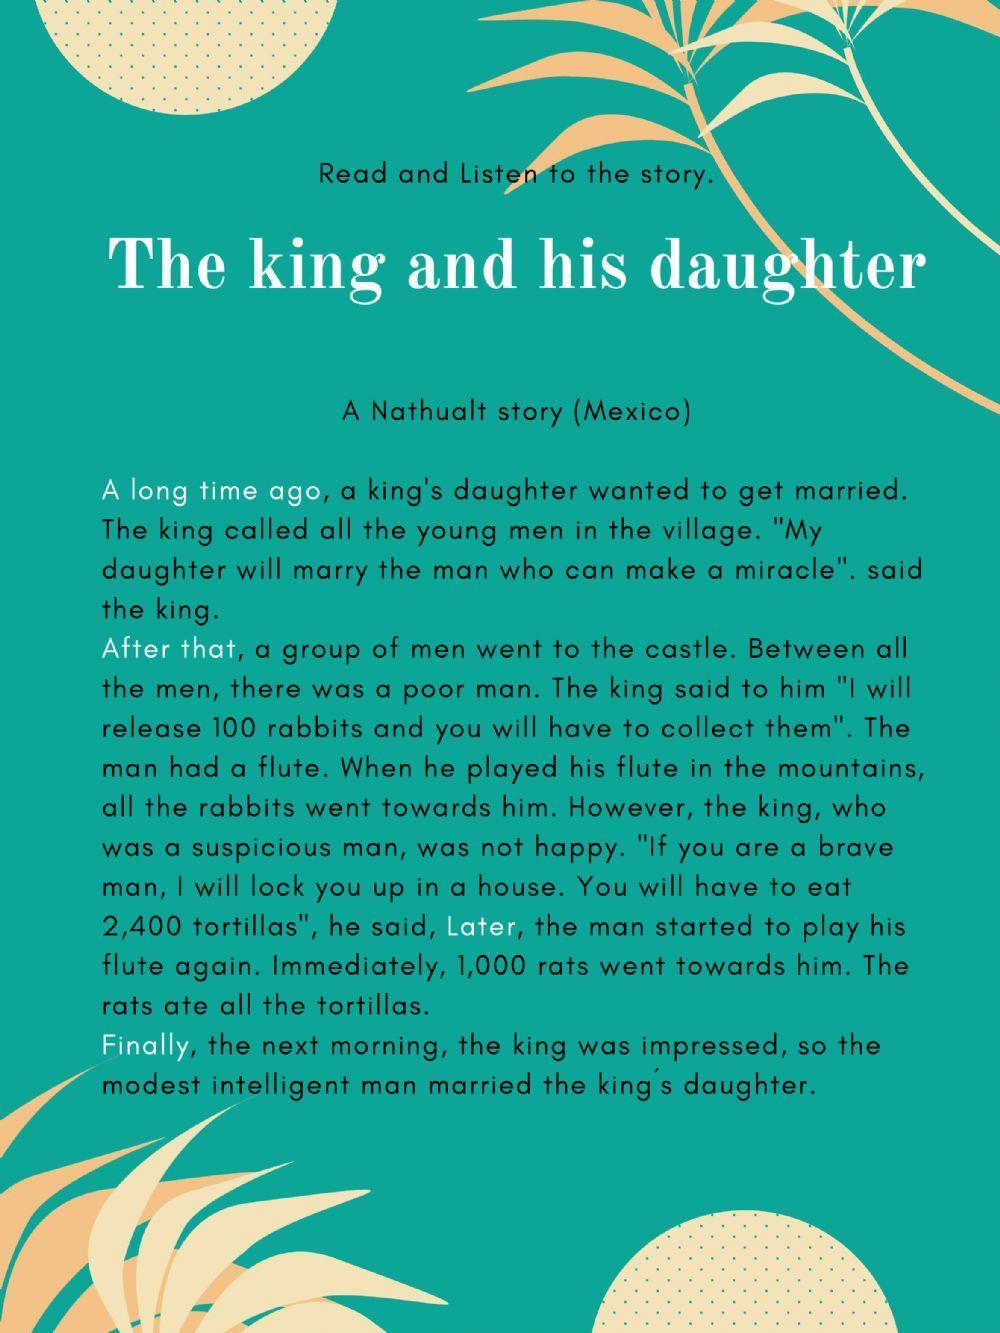 The king and his daughter